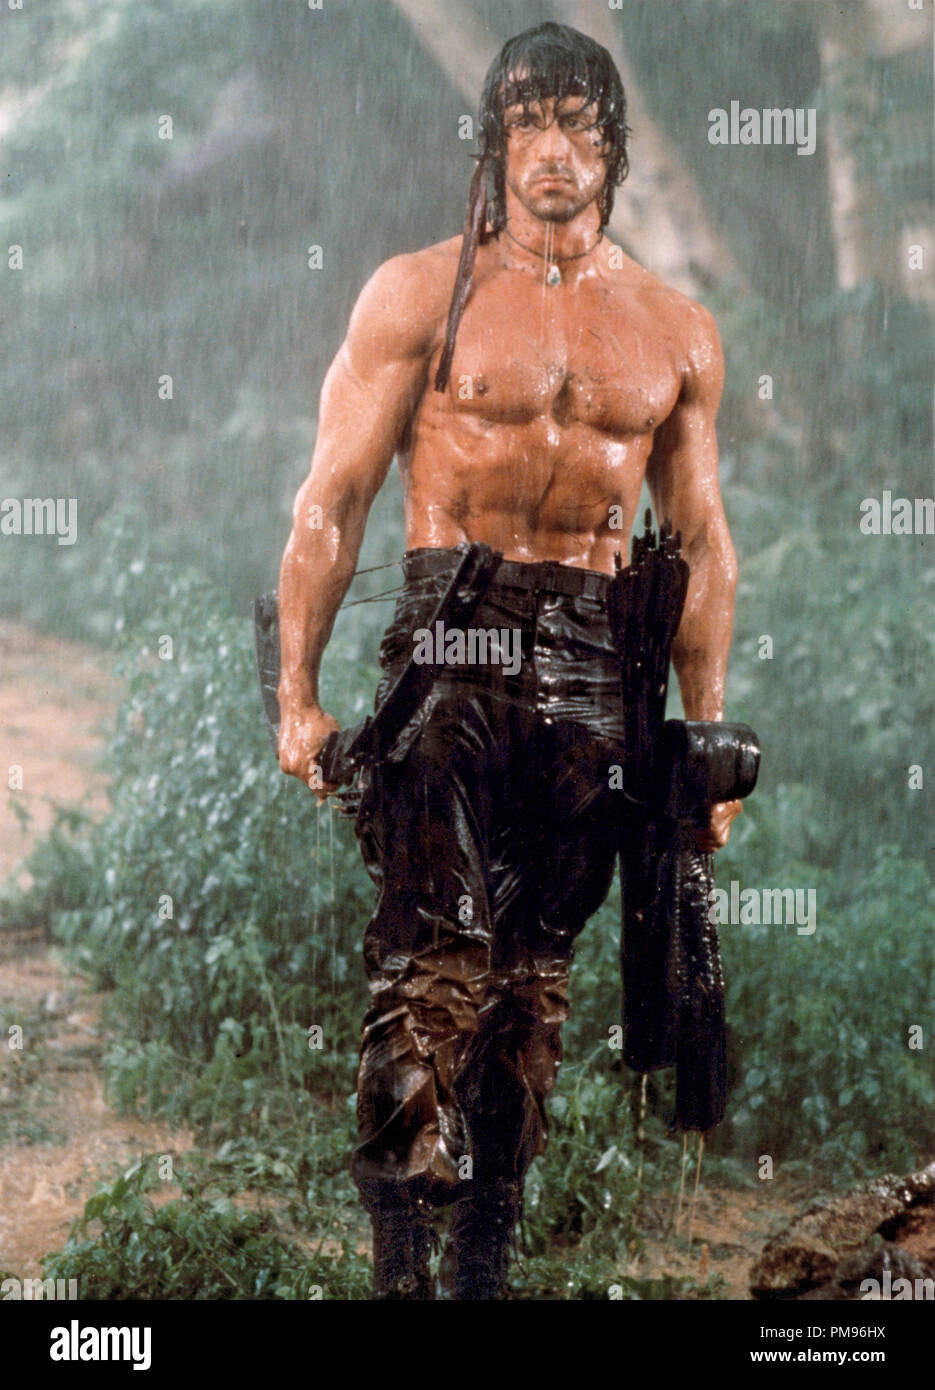 Studio Publicity Still from 'Rambo: First Blood Part II' Sylvester Stallone © 1985 Tri-Star All Rights Reserved   File Reference # 31703134THA  For Editorial Use Only Stock Photo